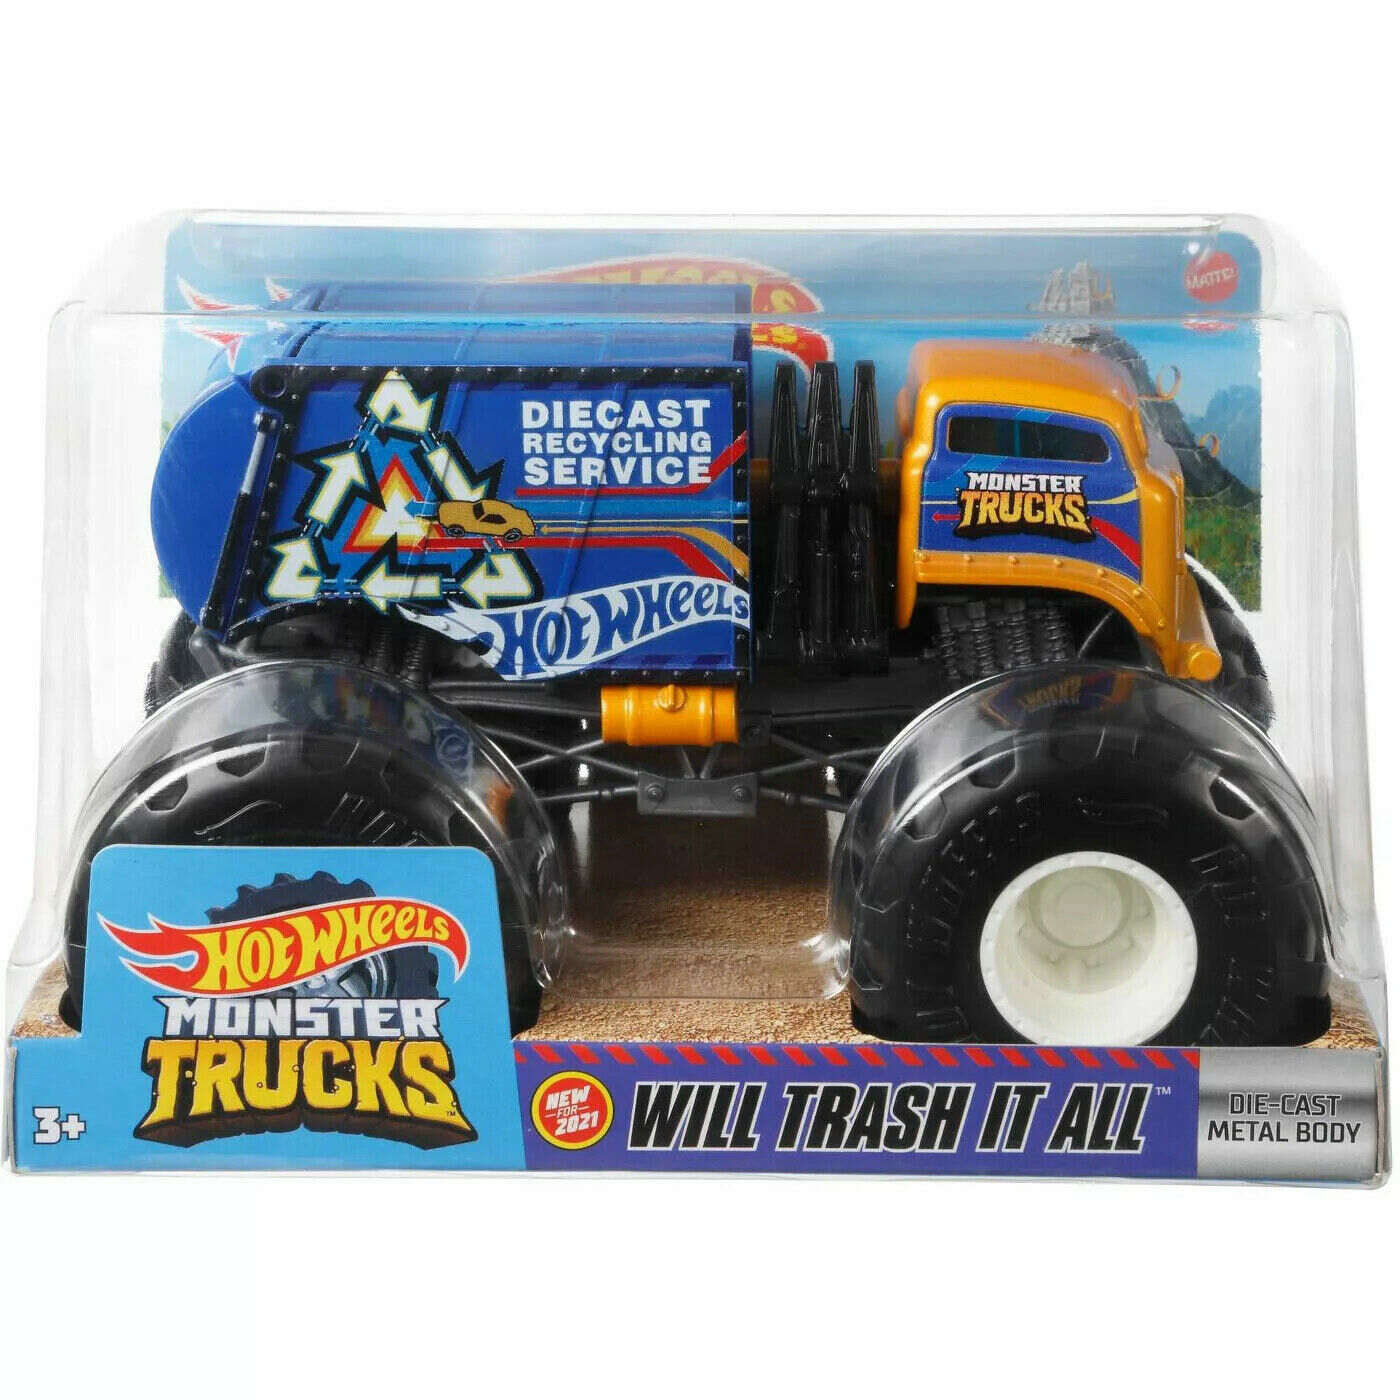 Hot Wheels Monster Trucks 1:24 Collection - Choose Your Favorite!